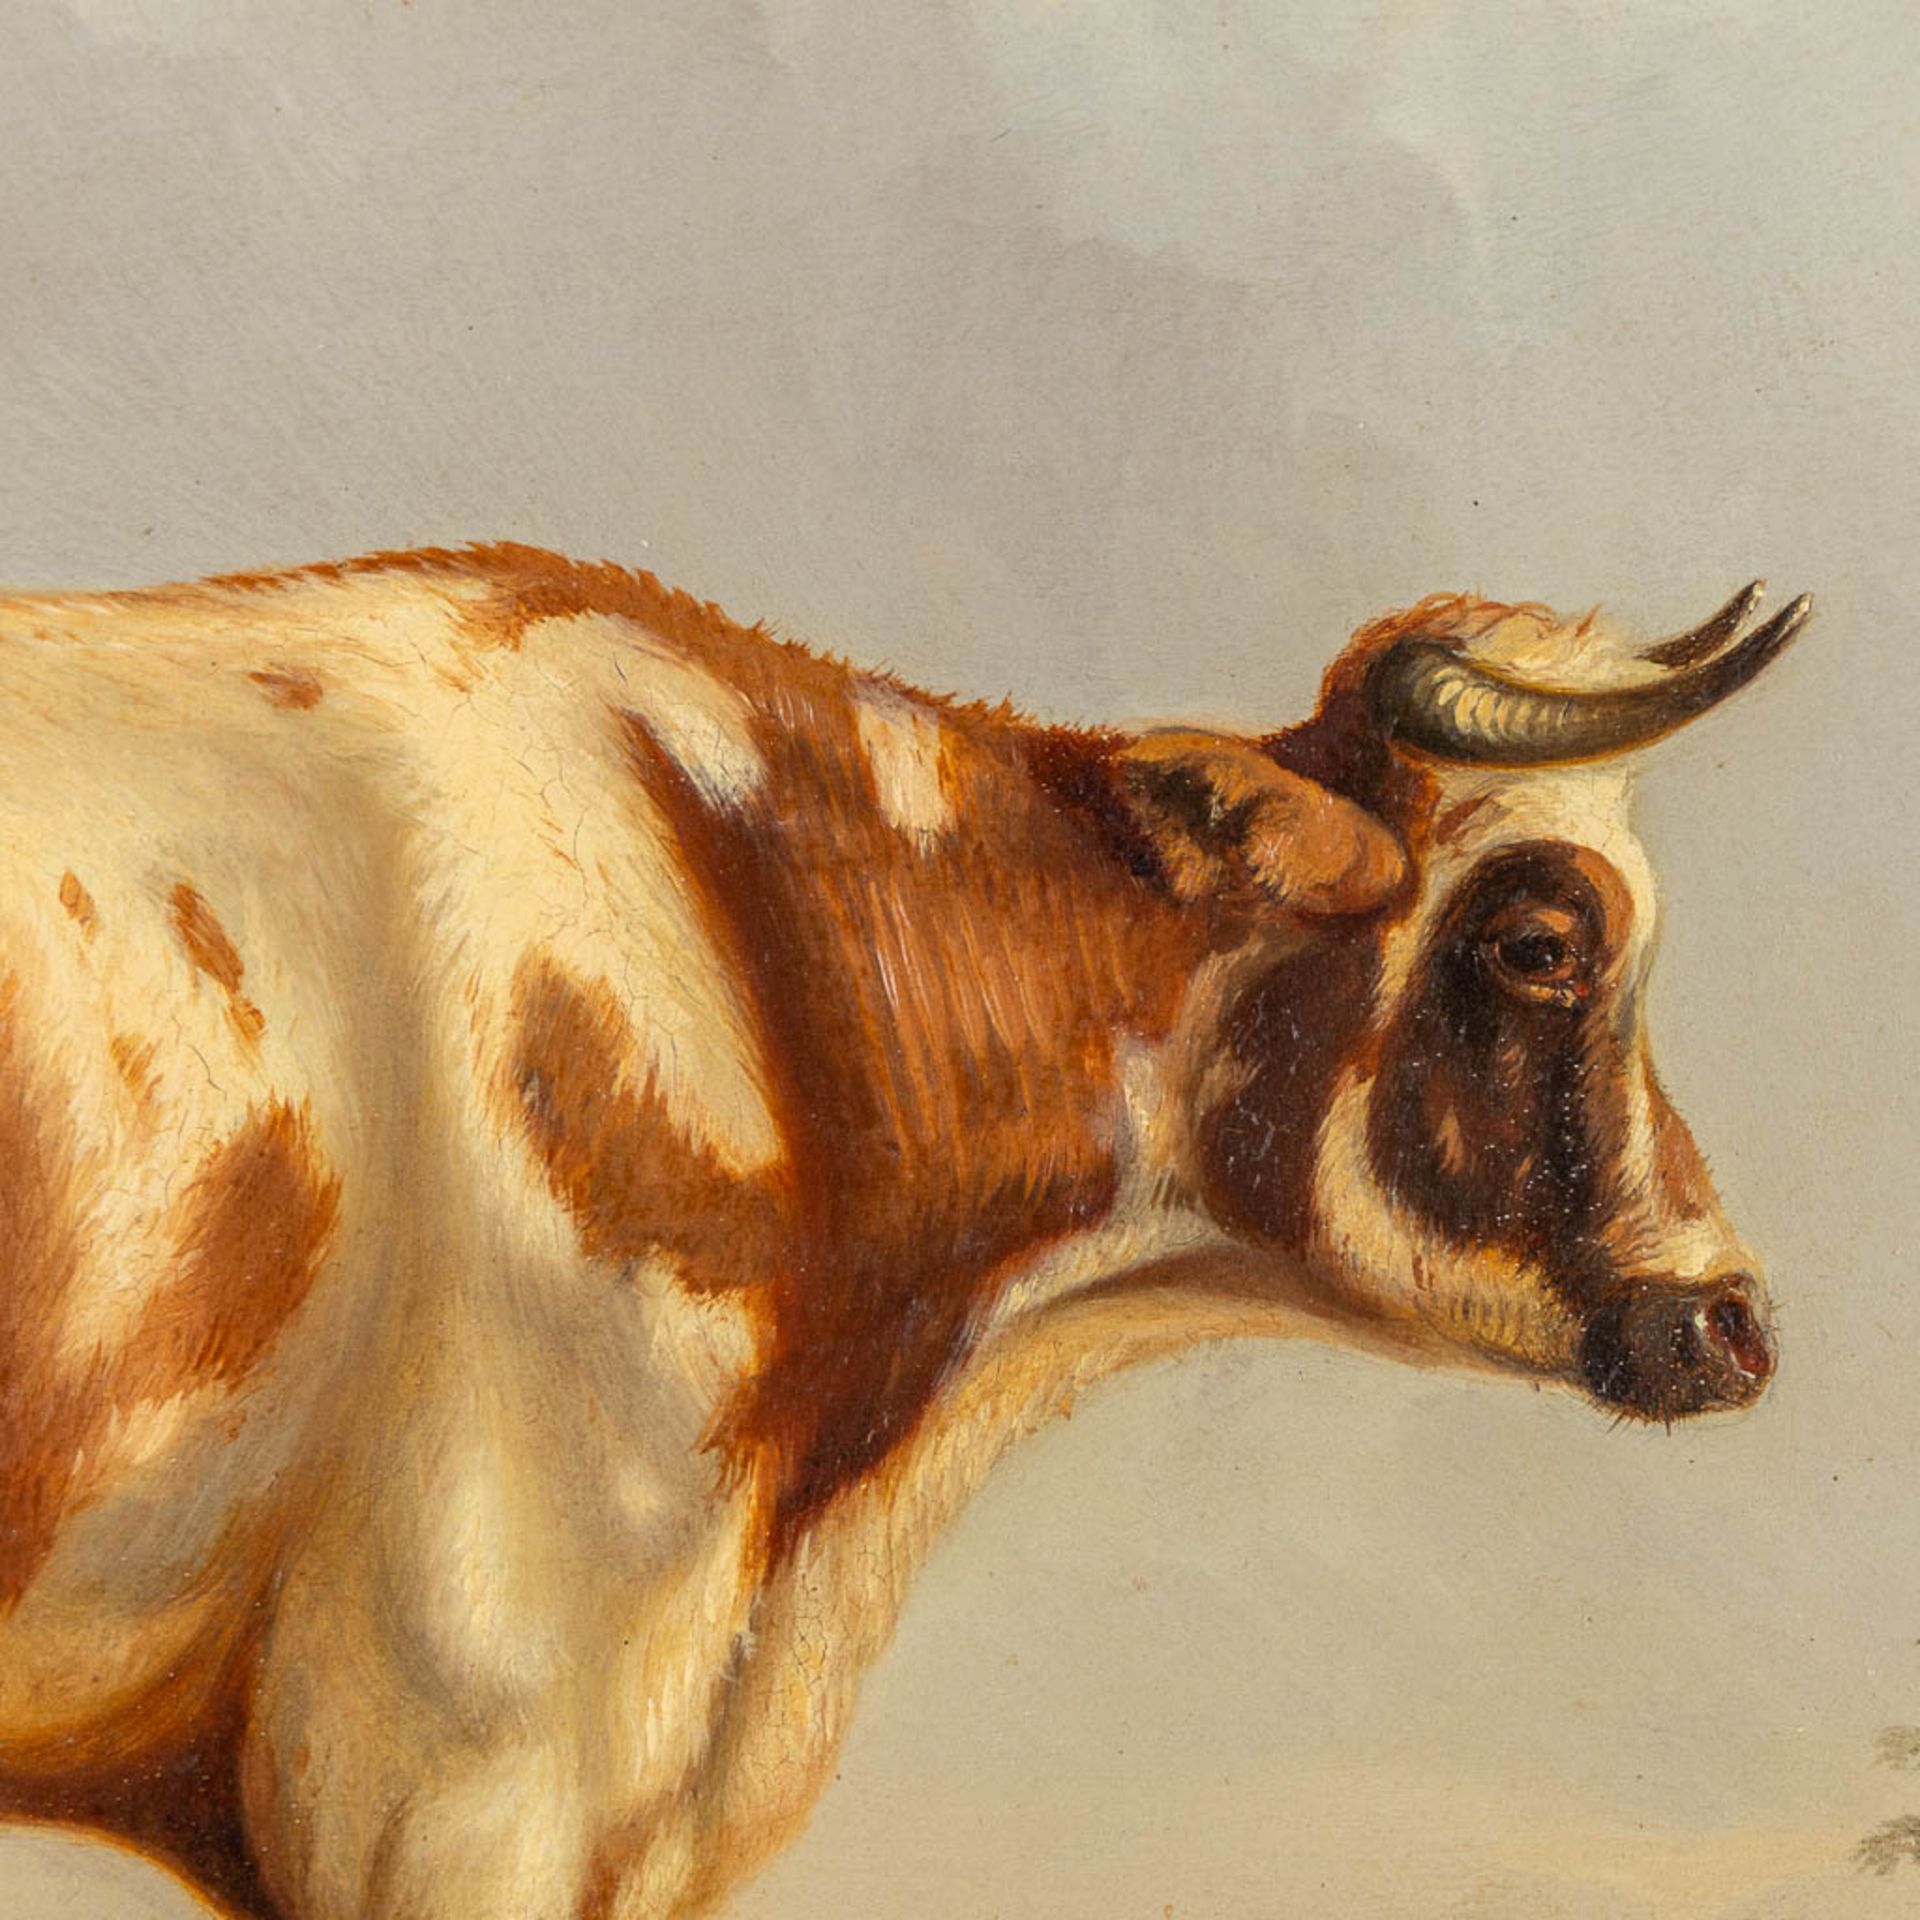 J. VOJAVE (XIX) 'Cow and sheep' oil on a mahogany panel. 1851. (W:40 x H:30,5 cm) - Image 5 of 9